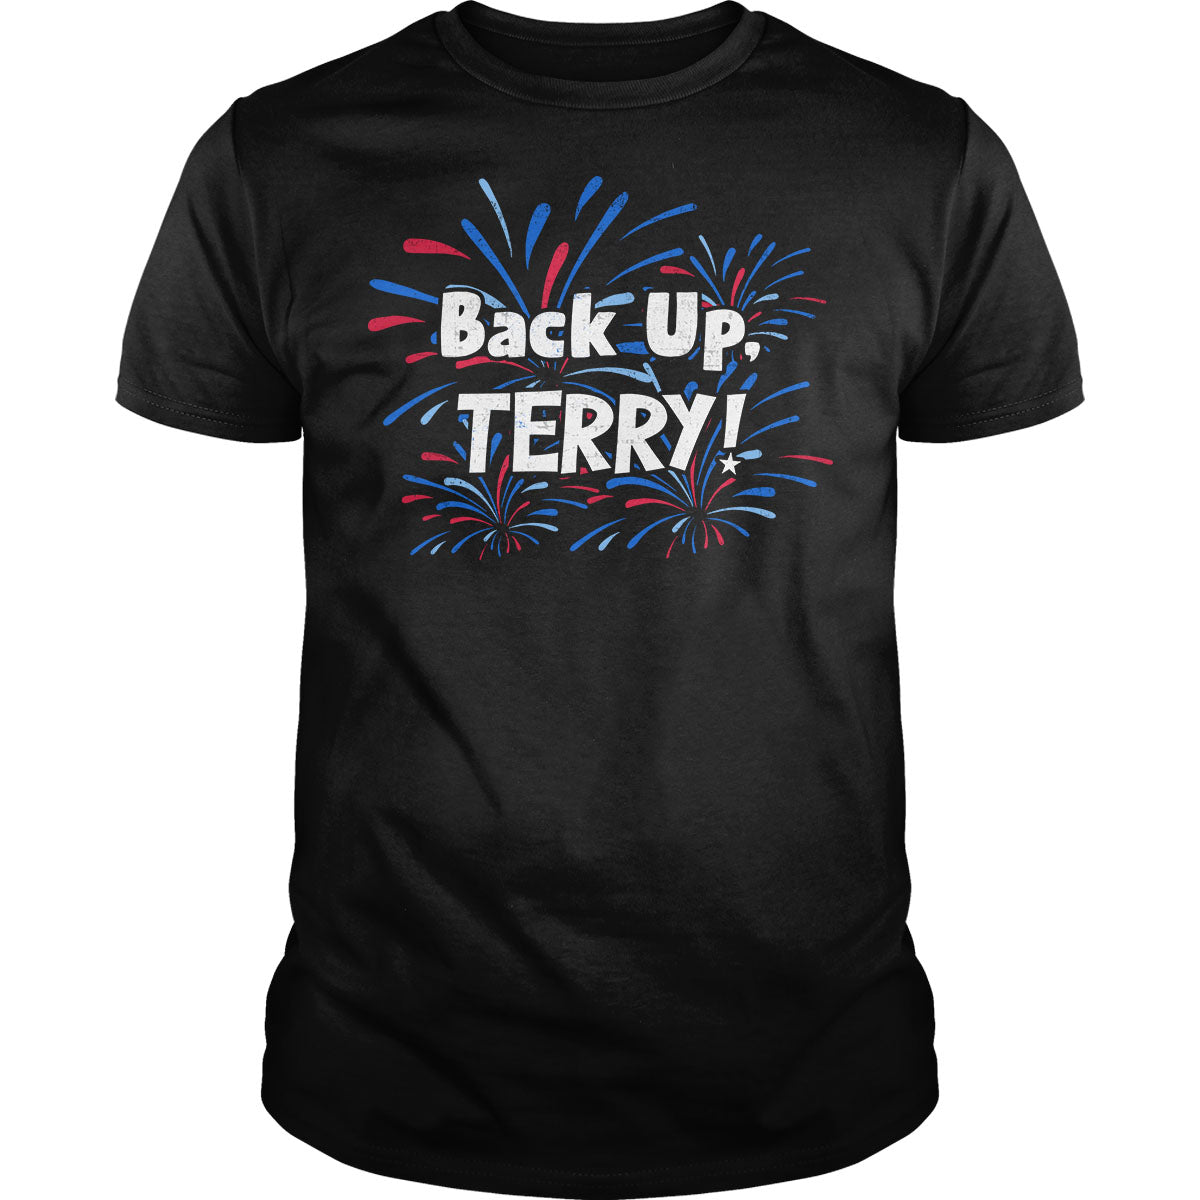 Back Up, Terry! - BustedTees.com